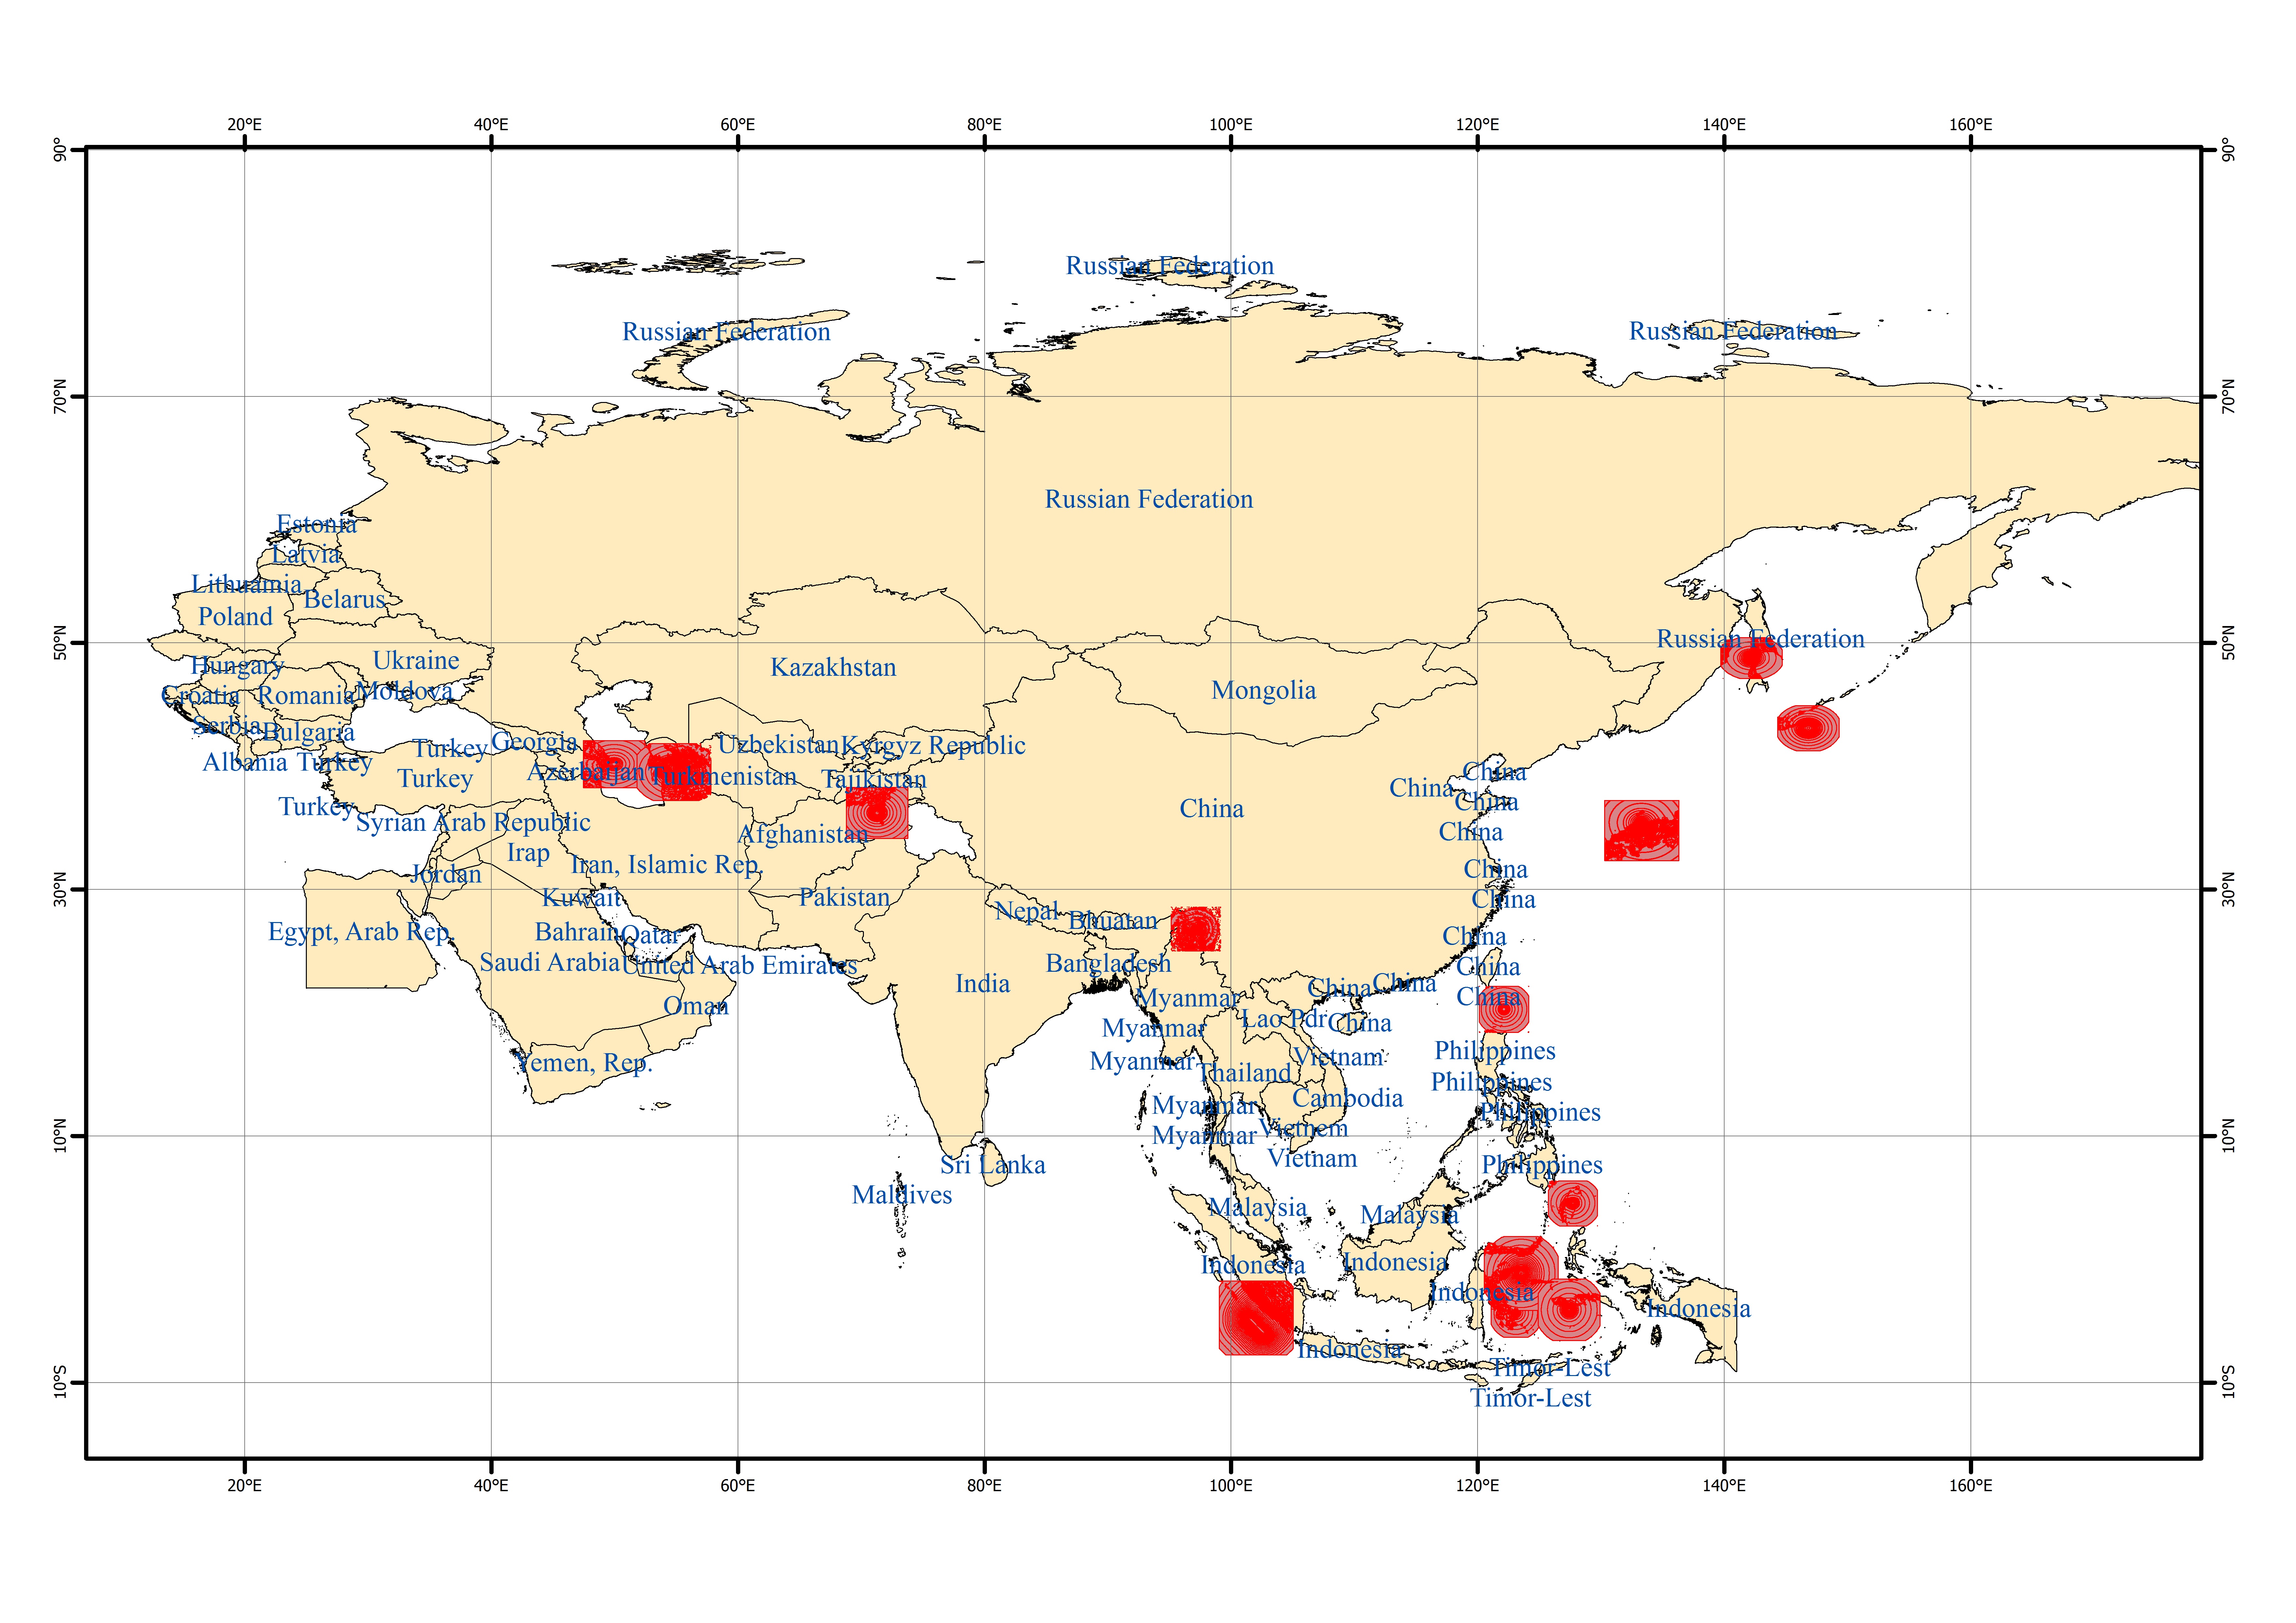 Spatio-temporal Distribution of Earthquake Disaster in the Belt and Road Area of 2000